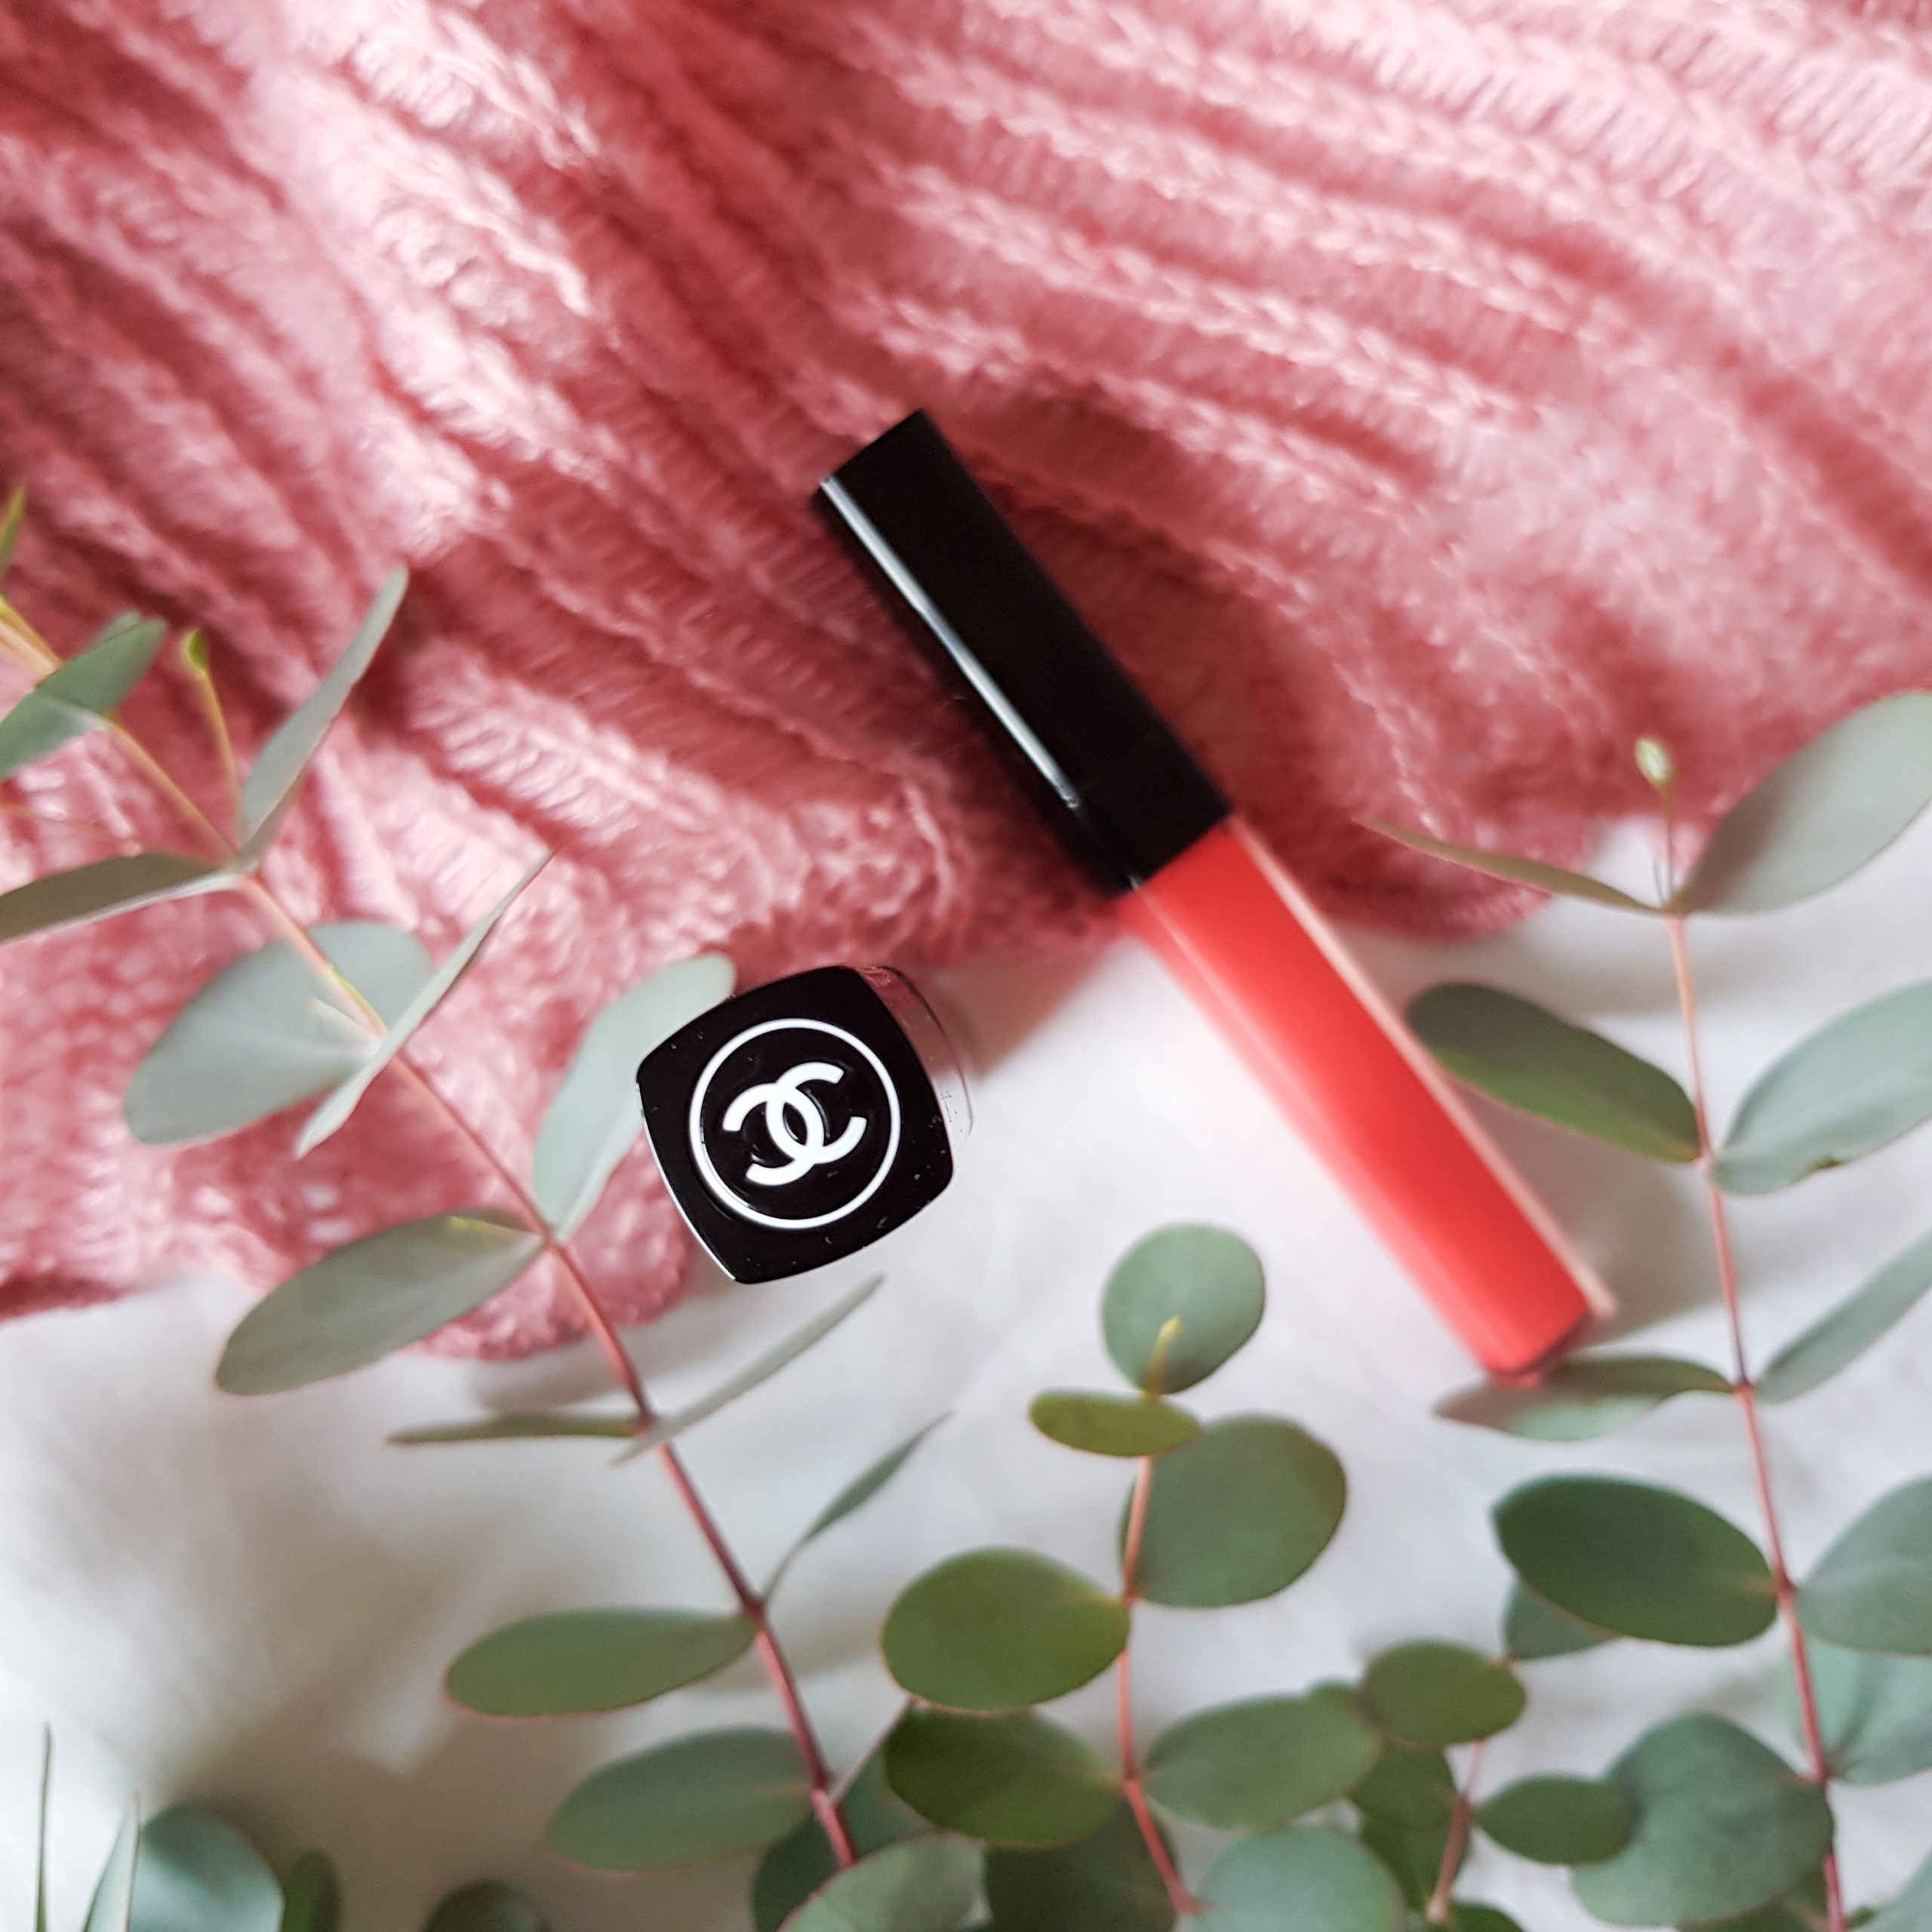 FrenchFriday: new Chanel Rouge Coco Lip Blush, Hydrating Lip and